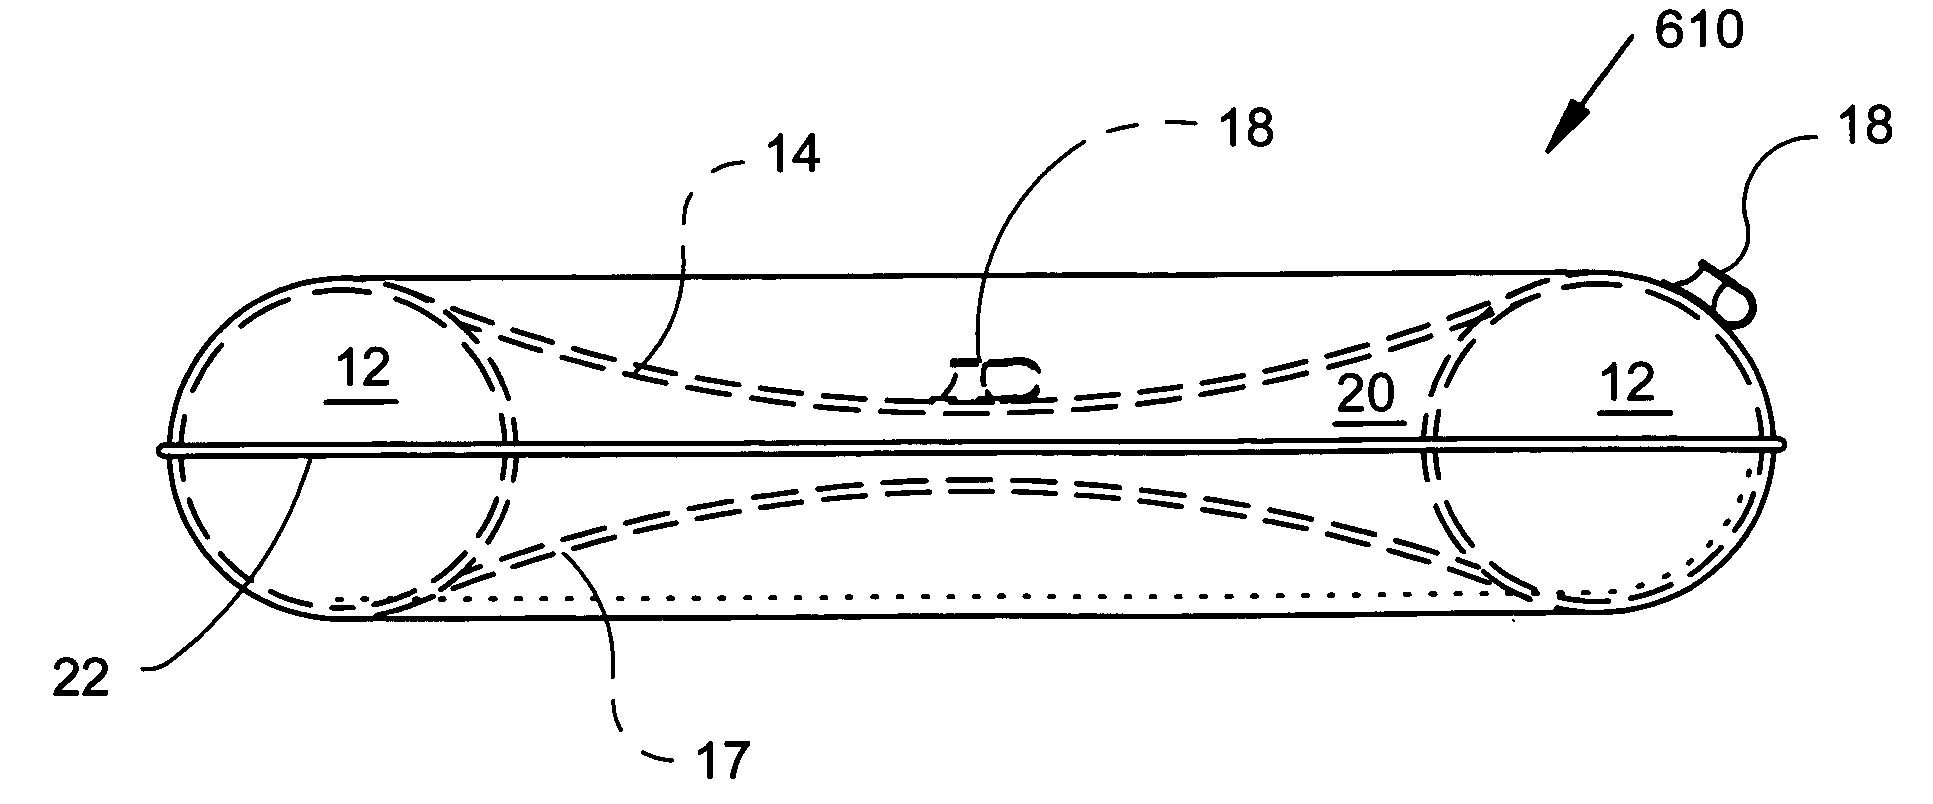 Modular inflatable multifunction field-deployable apparatus and methods of manufacture